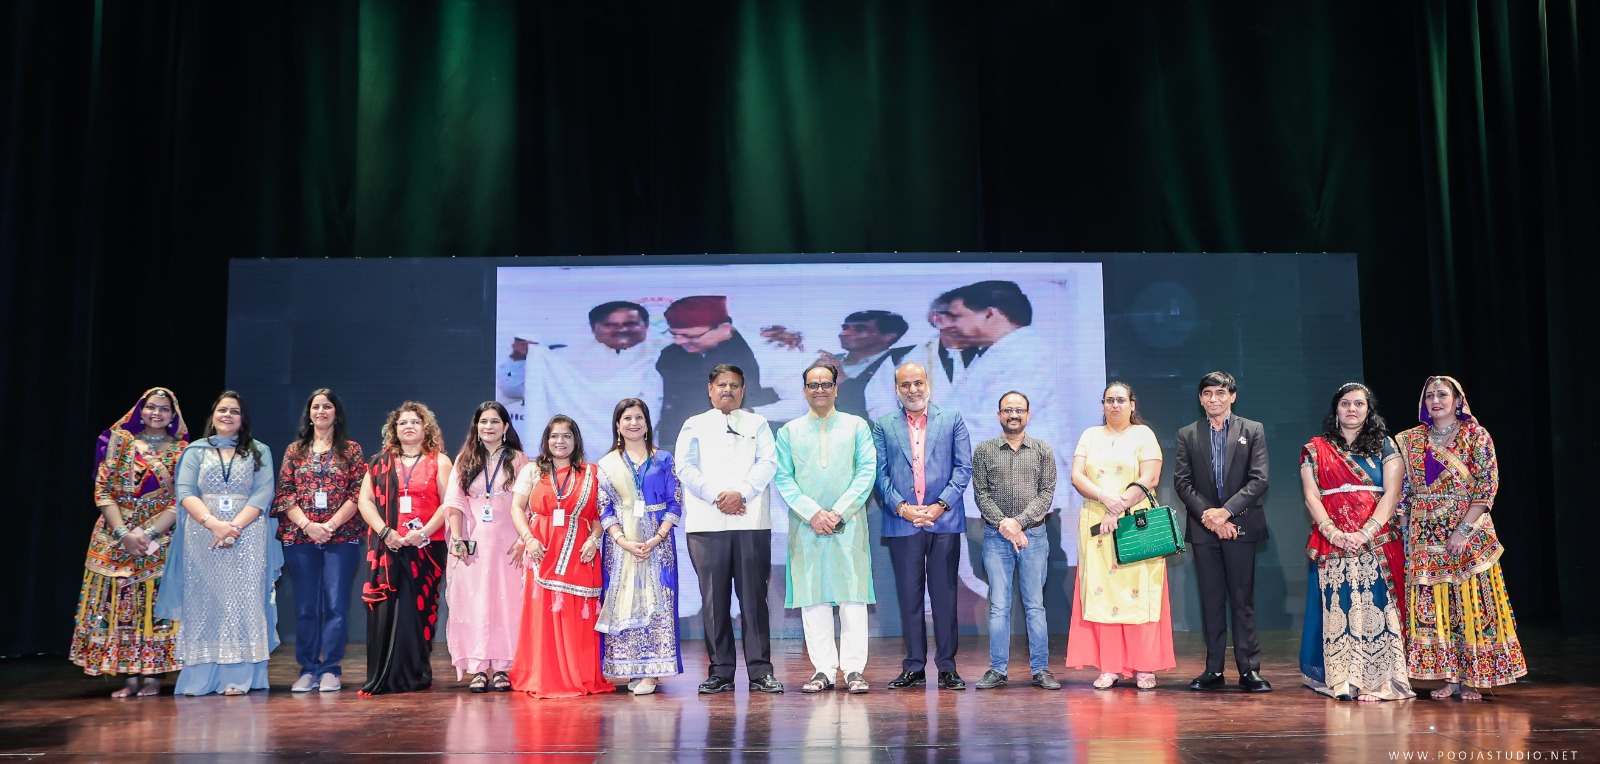 Global Bharat Festival organized a memorable evening in Dubai to celebrate and preserve cultural heritage